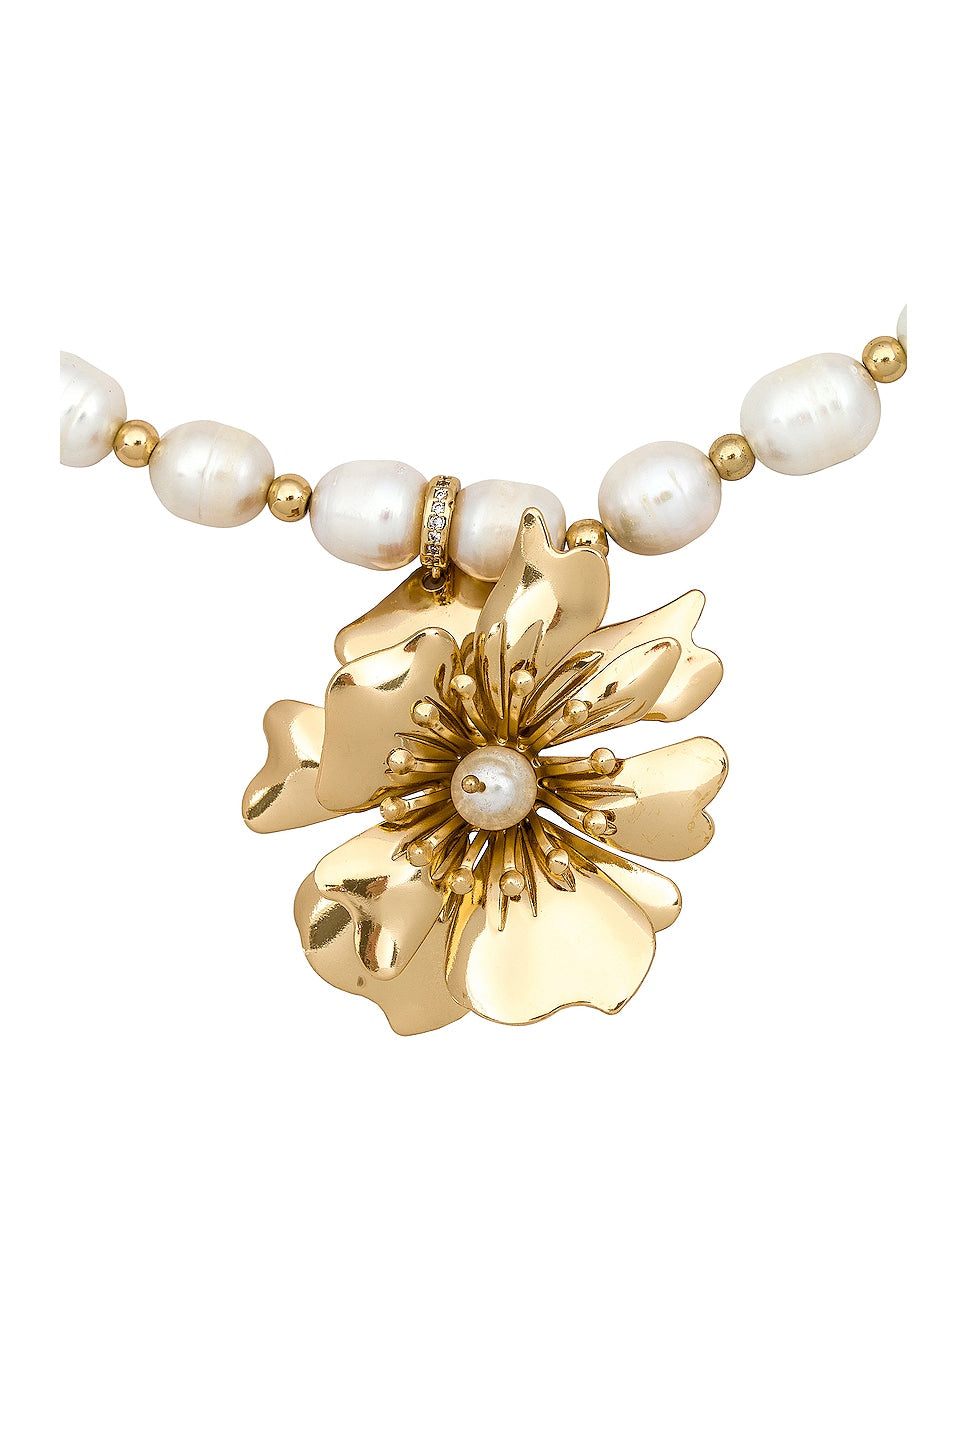 Pearl And Floral Necklace - SHOPJAUS - JAUS